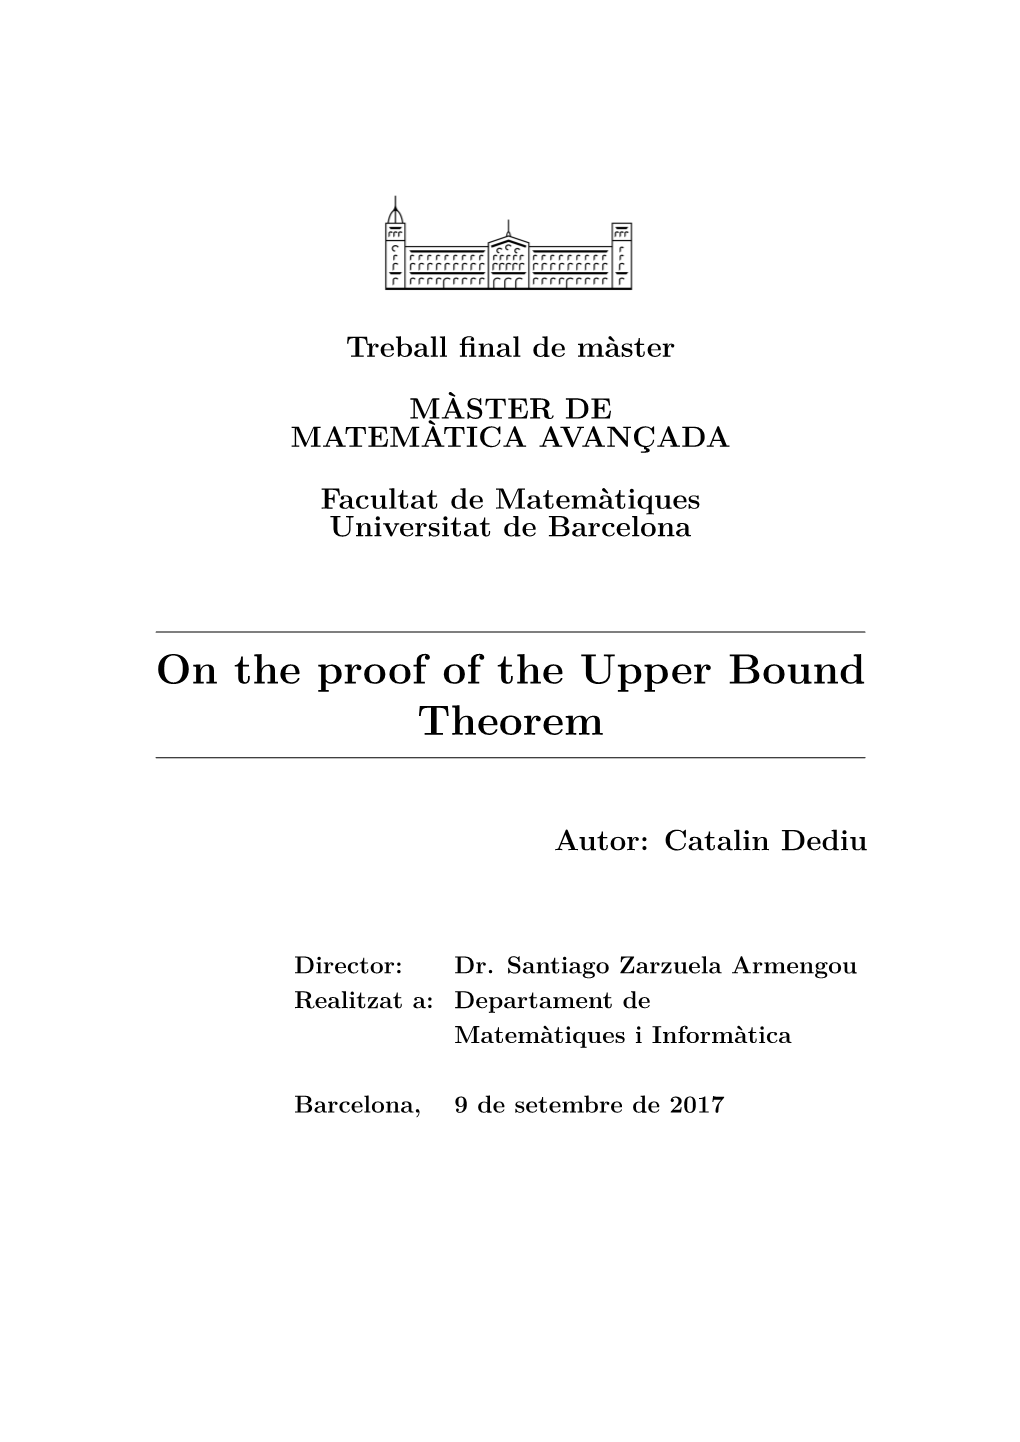 On the Proof of the Upper Bound Theorem